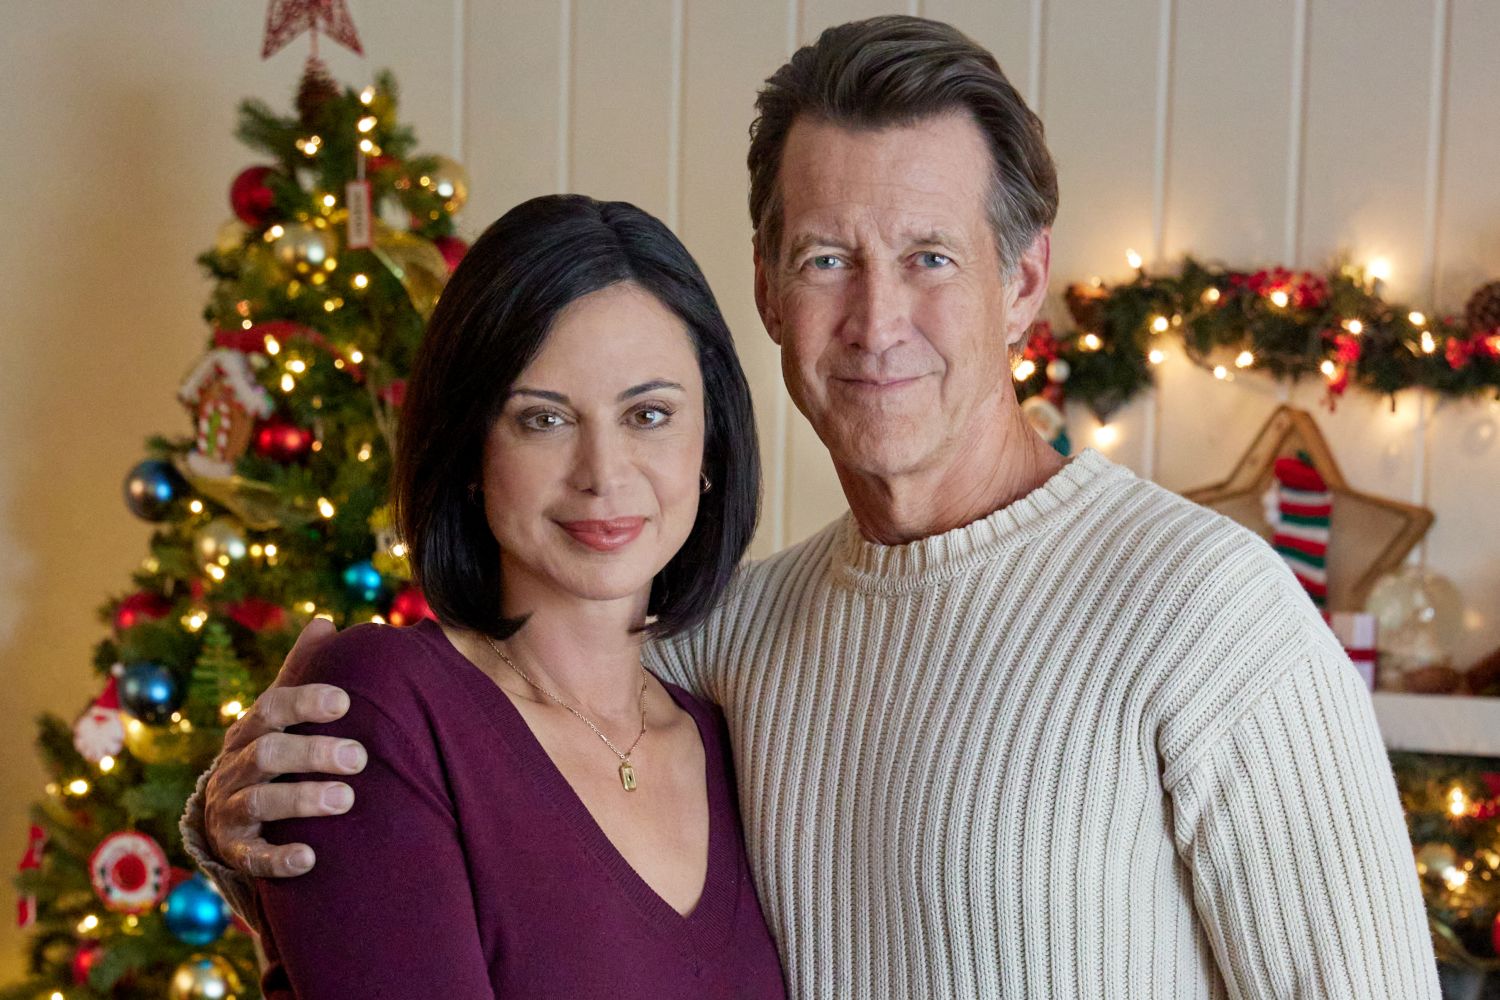 Good Witch fans beg Catherine Bell and James Denton to reboot Good Witch on Hallmark